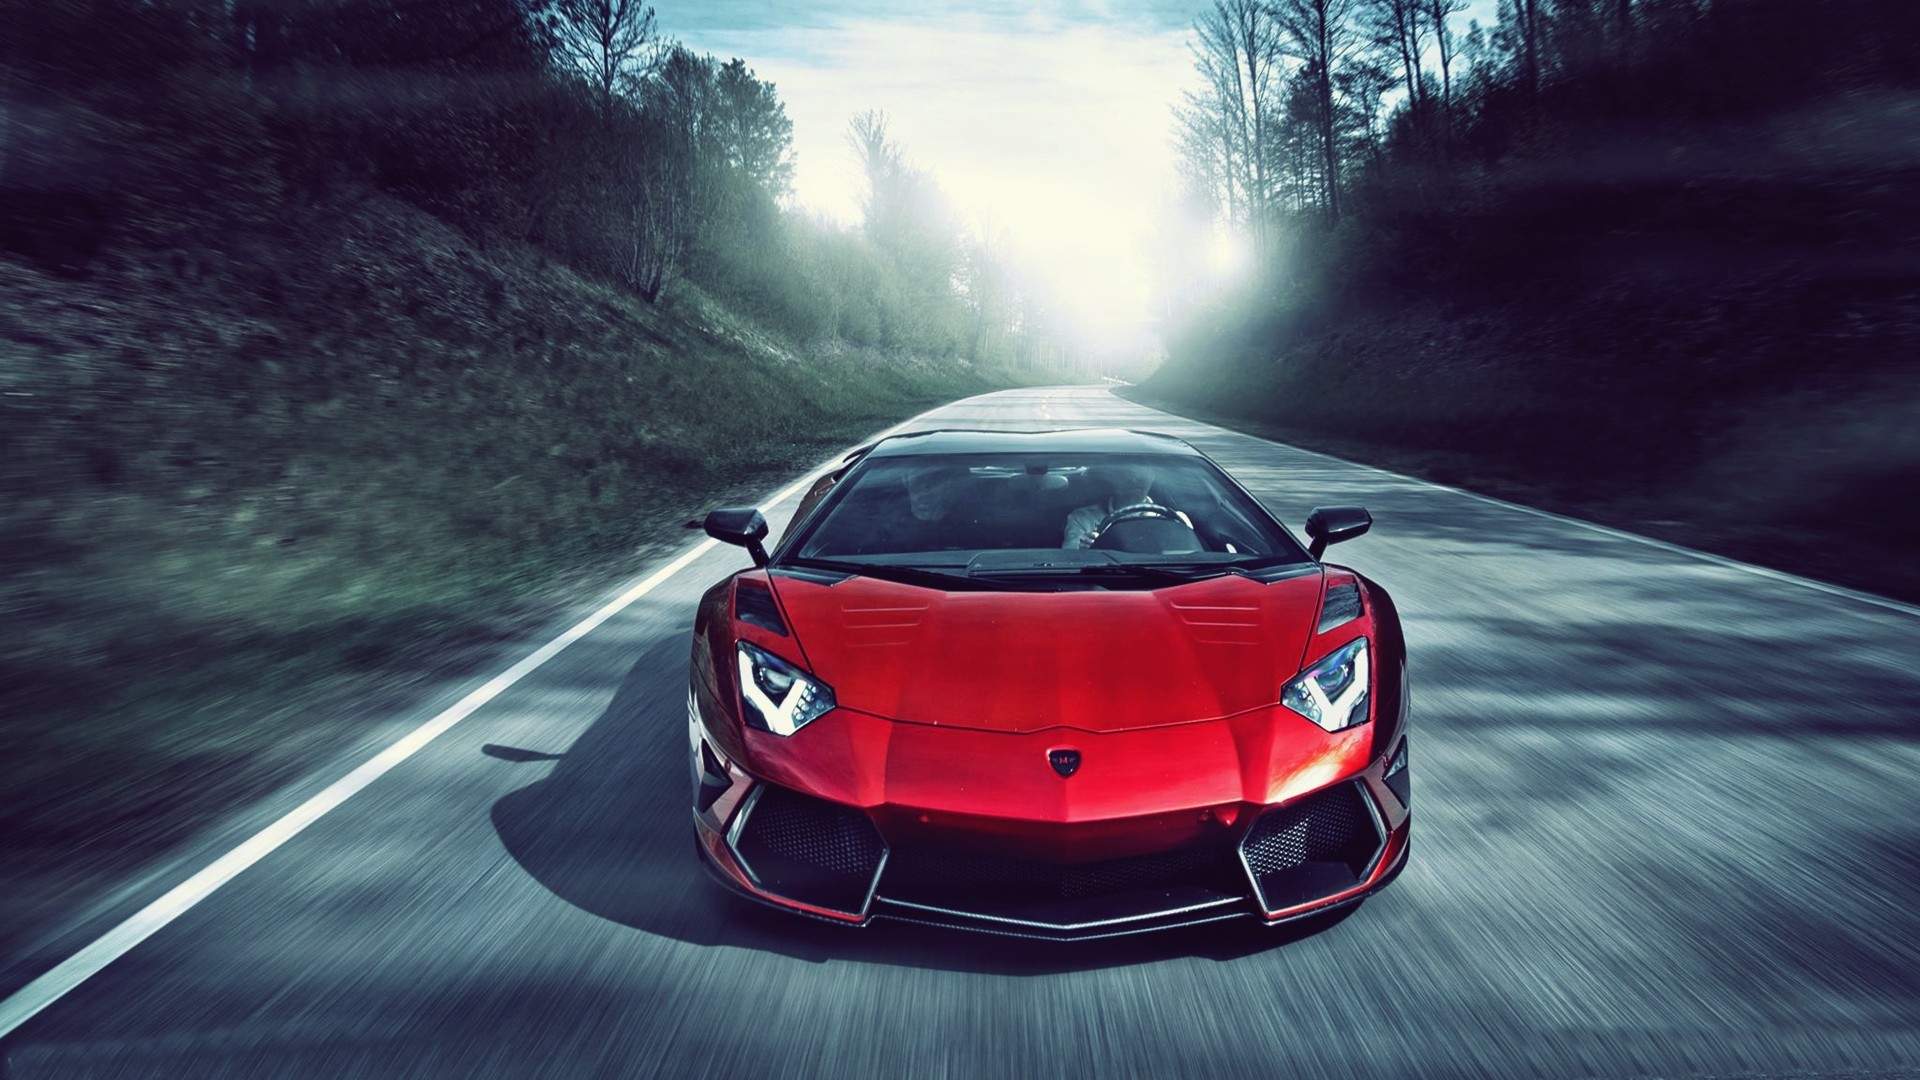 Lamborghini Wallpapers and Pictures Collection 44 1920x1080